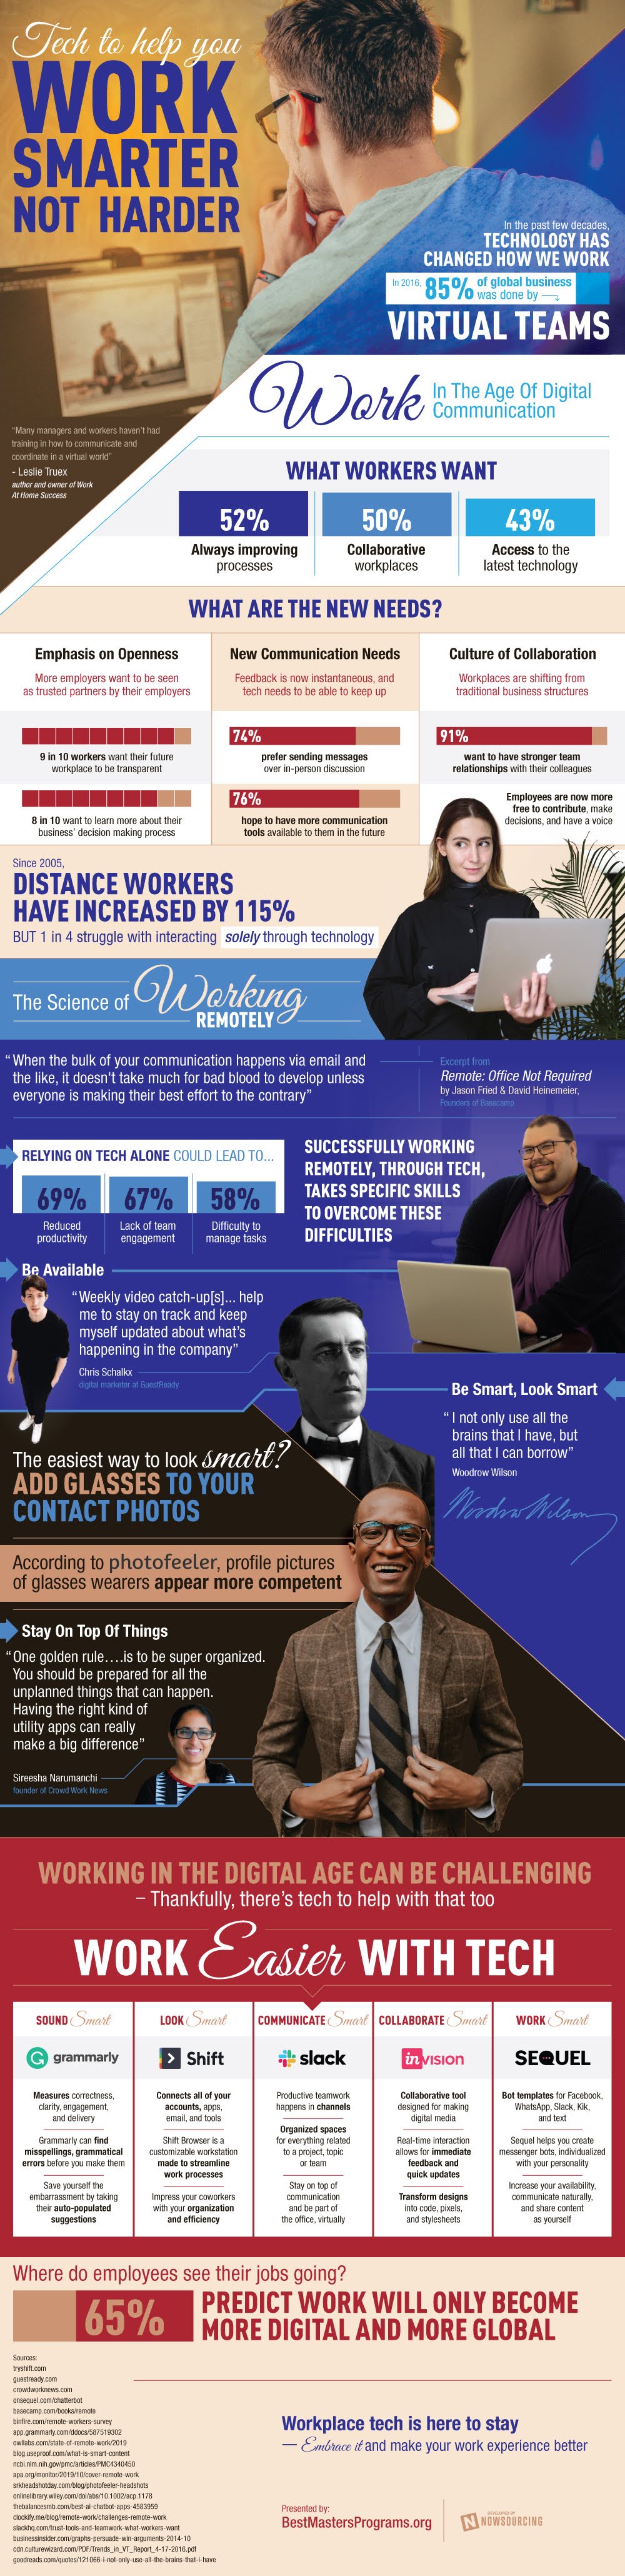 Tech To Help Optimize Your Remote Work #infographic